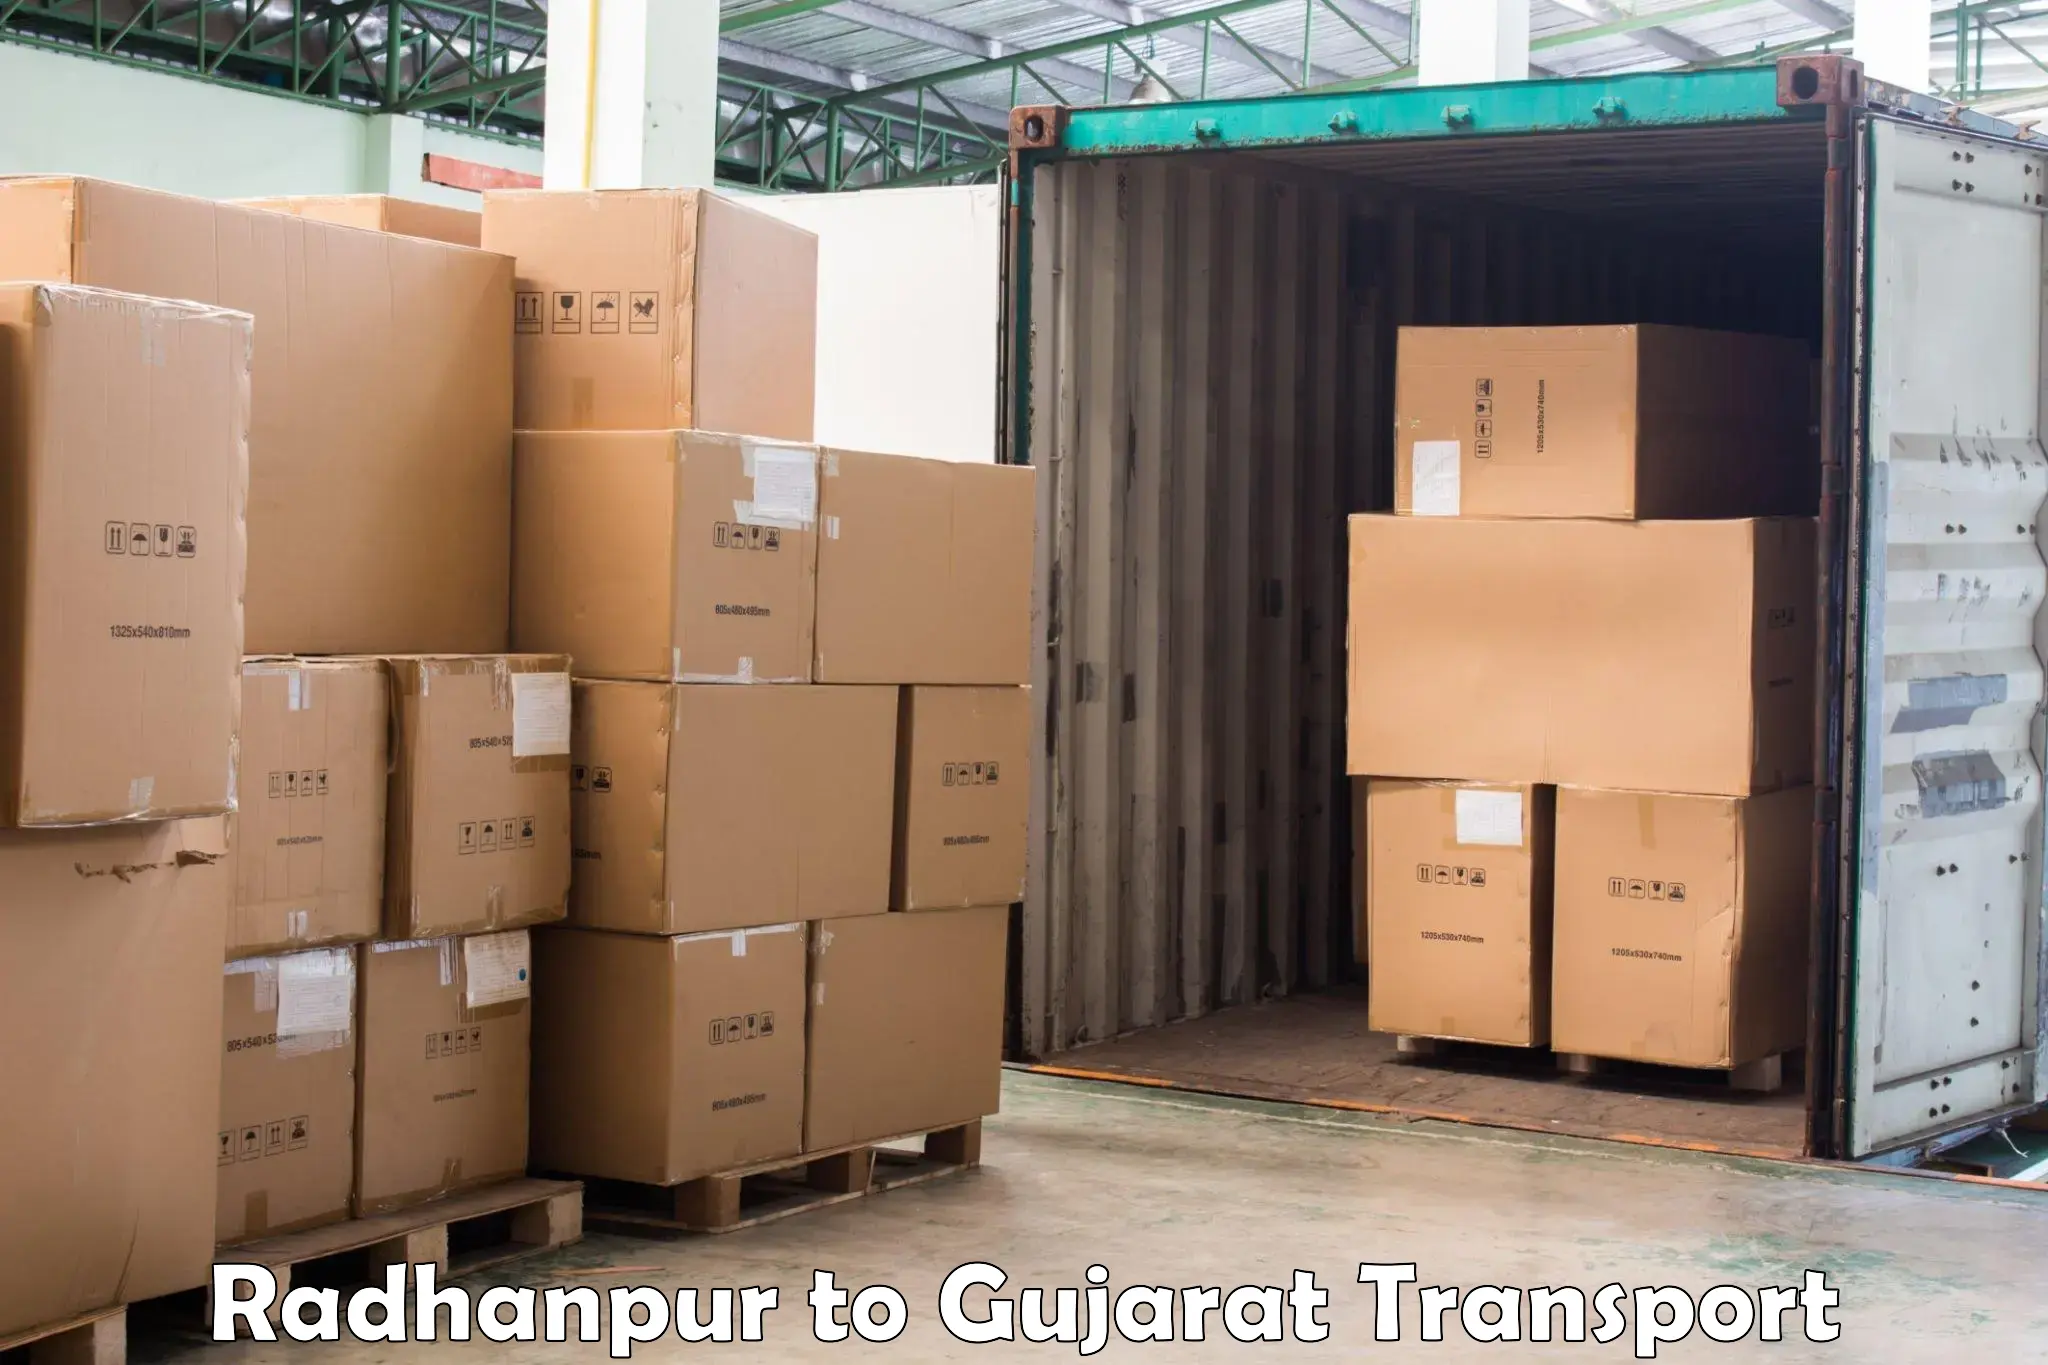 Transport bike from one state to another Radhanpur to Gujarat